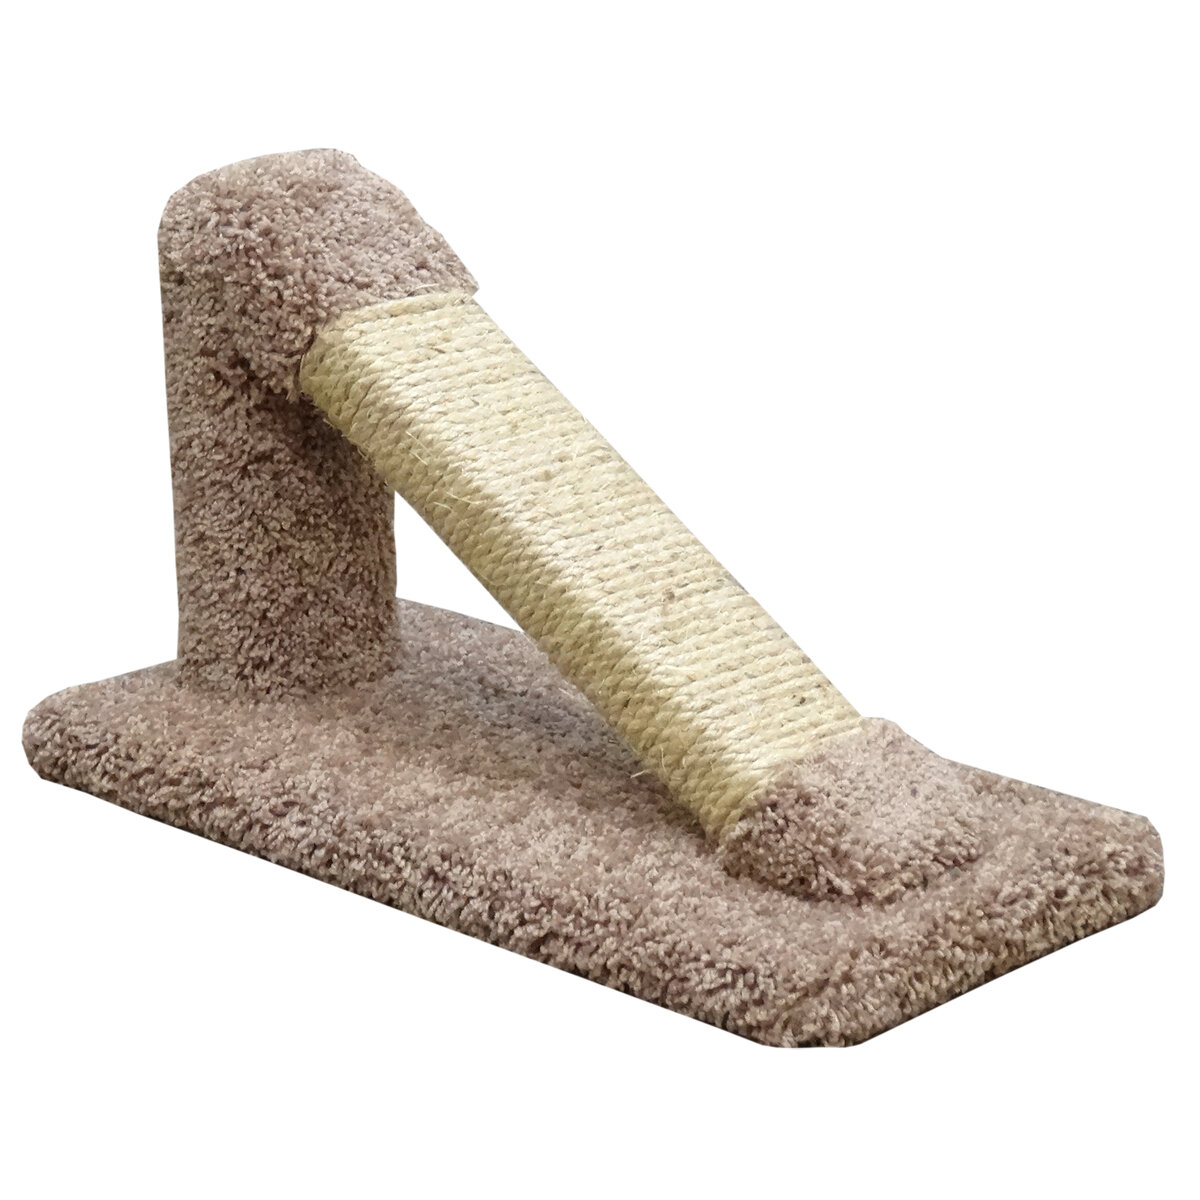 New Cat Condos Premier Tilted Scratching Post 